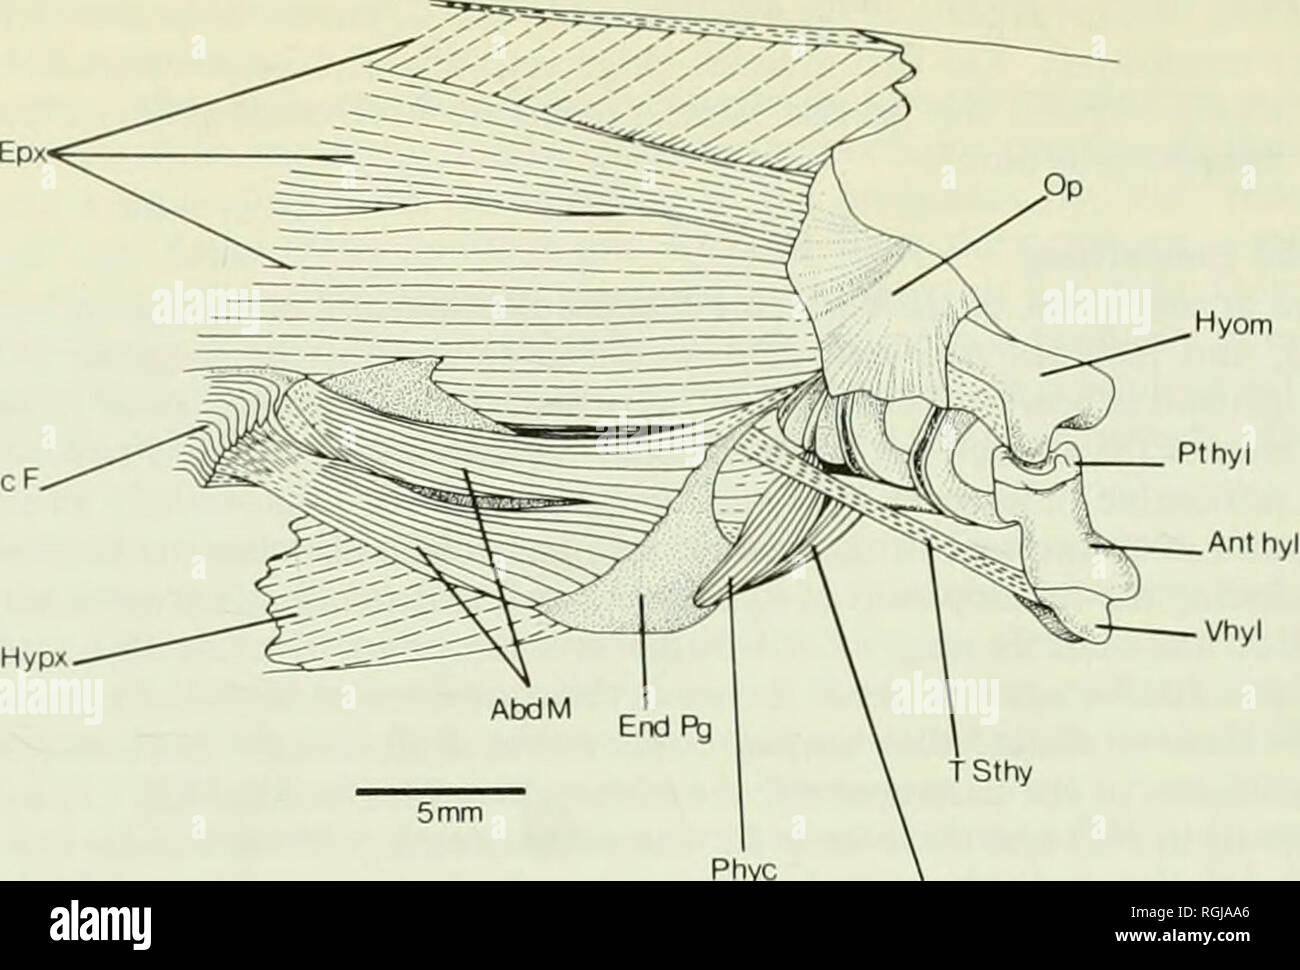 . Bulletin of the British Museum (Natural History). PecF.. Phyc ?Sthy M Fig. 15 Lipogenys gilli. Body and superficial pectoral fin muscles in the region of the sternohyoideus muscle (whose tendon, T Sthy, is visible), in right lateral view. Specimen MCZ 38072. in Elops is like that I have described for Pterothrissus and Albula. Forey (1973a : 355) too describes Pterothrissus as having an Elops-kt origin for the sternohyoideus. In Halosawus guentheri most of the sternohyoideus arises aponeuroticaliy from the hypaxial muscles but a small part arises from fibres attached to the lateral face of  Stock Photo